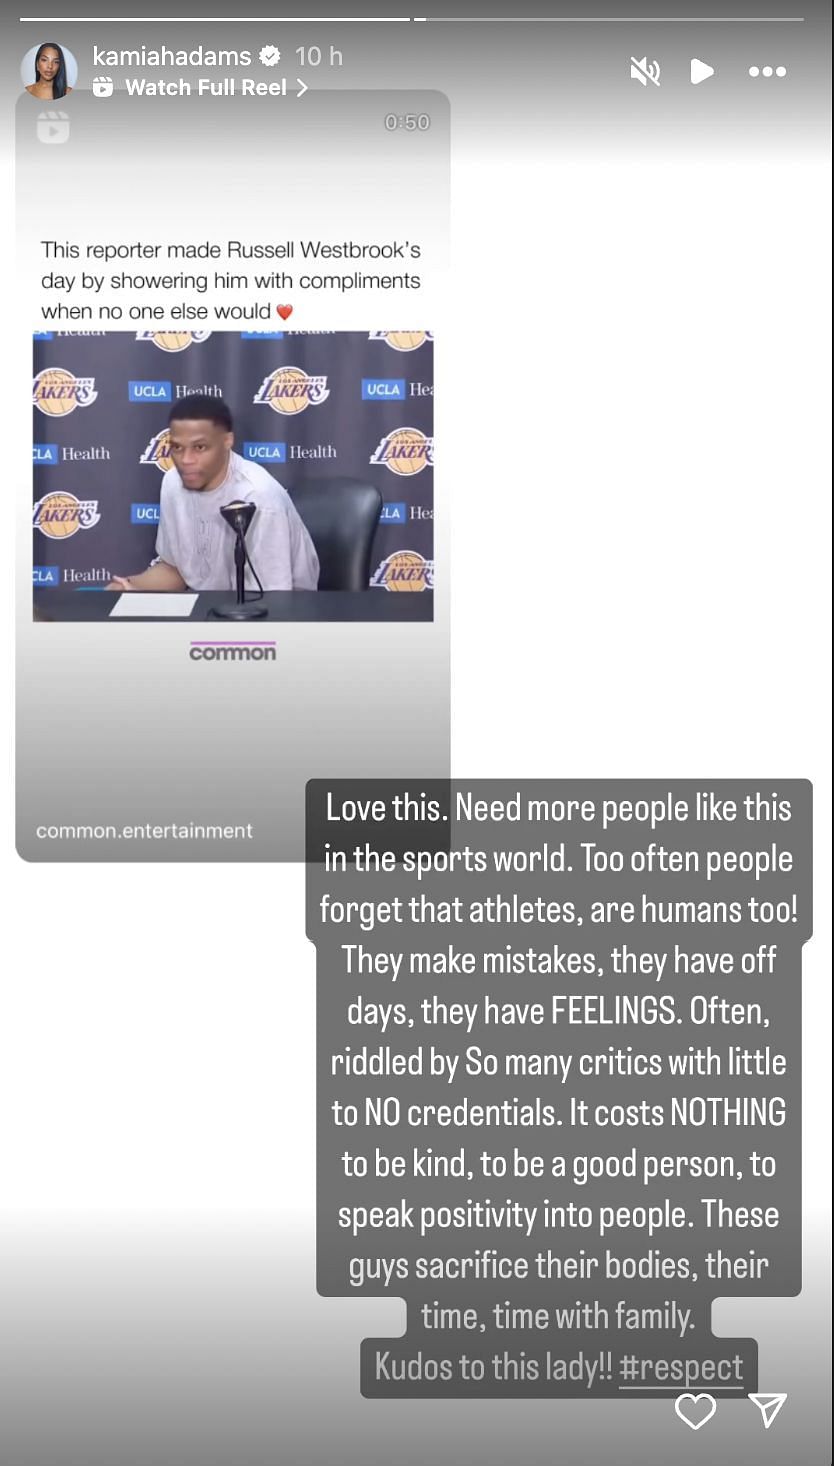 Bradley Beal&#039;s wife Kamiah Adams praised the reporter&#039;s work ethic amid all the hate for Russell Westbrook when he was a Laker